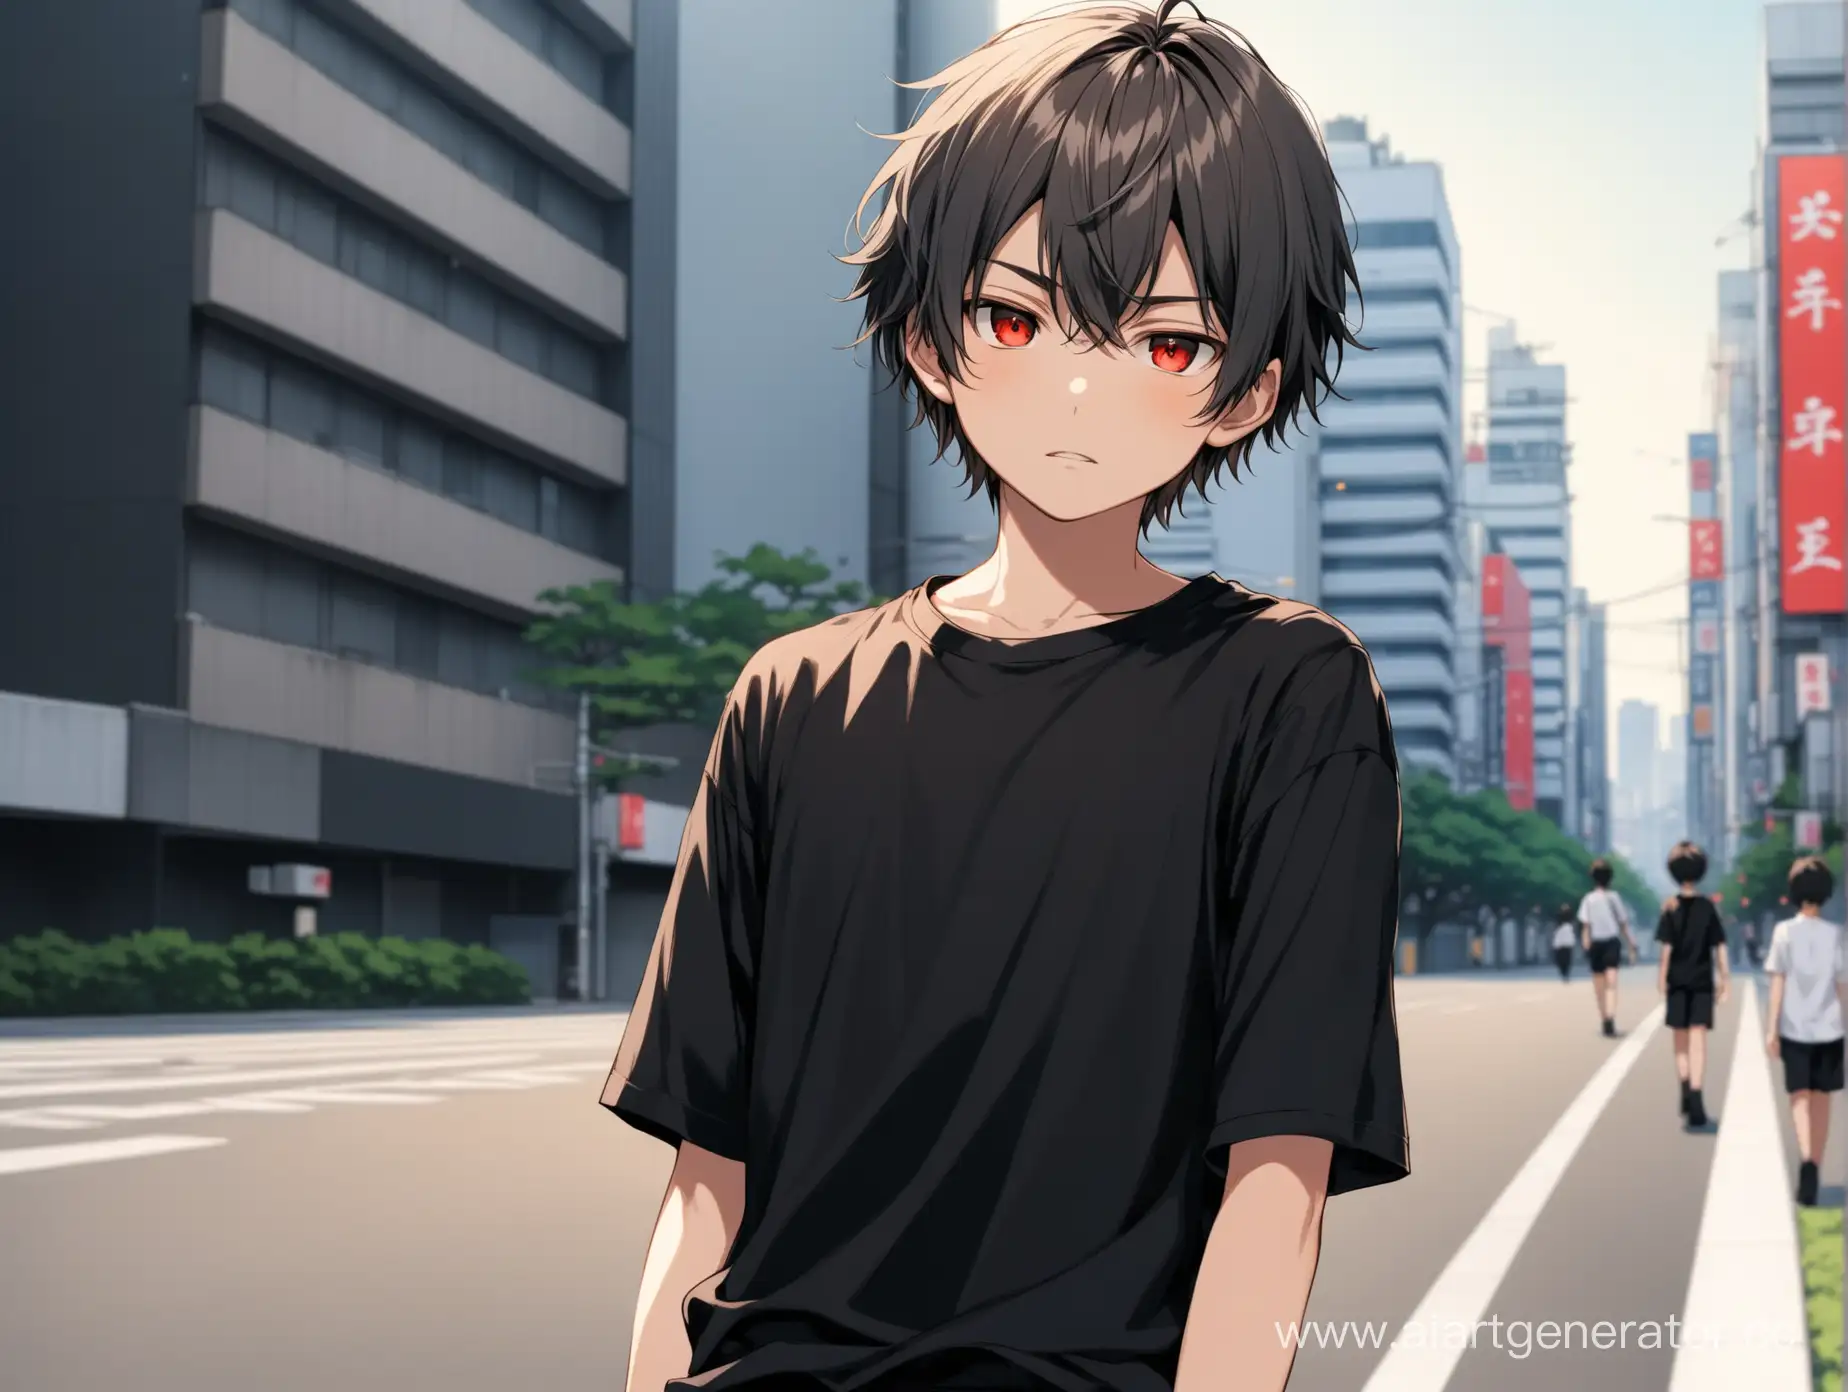 A boy with ashen hair and red eyes is 14 years old. He prefers a black short-sleeved shirt.against the background of modern Tokyo, medium-length hair